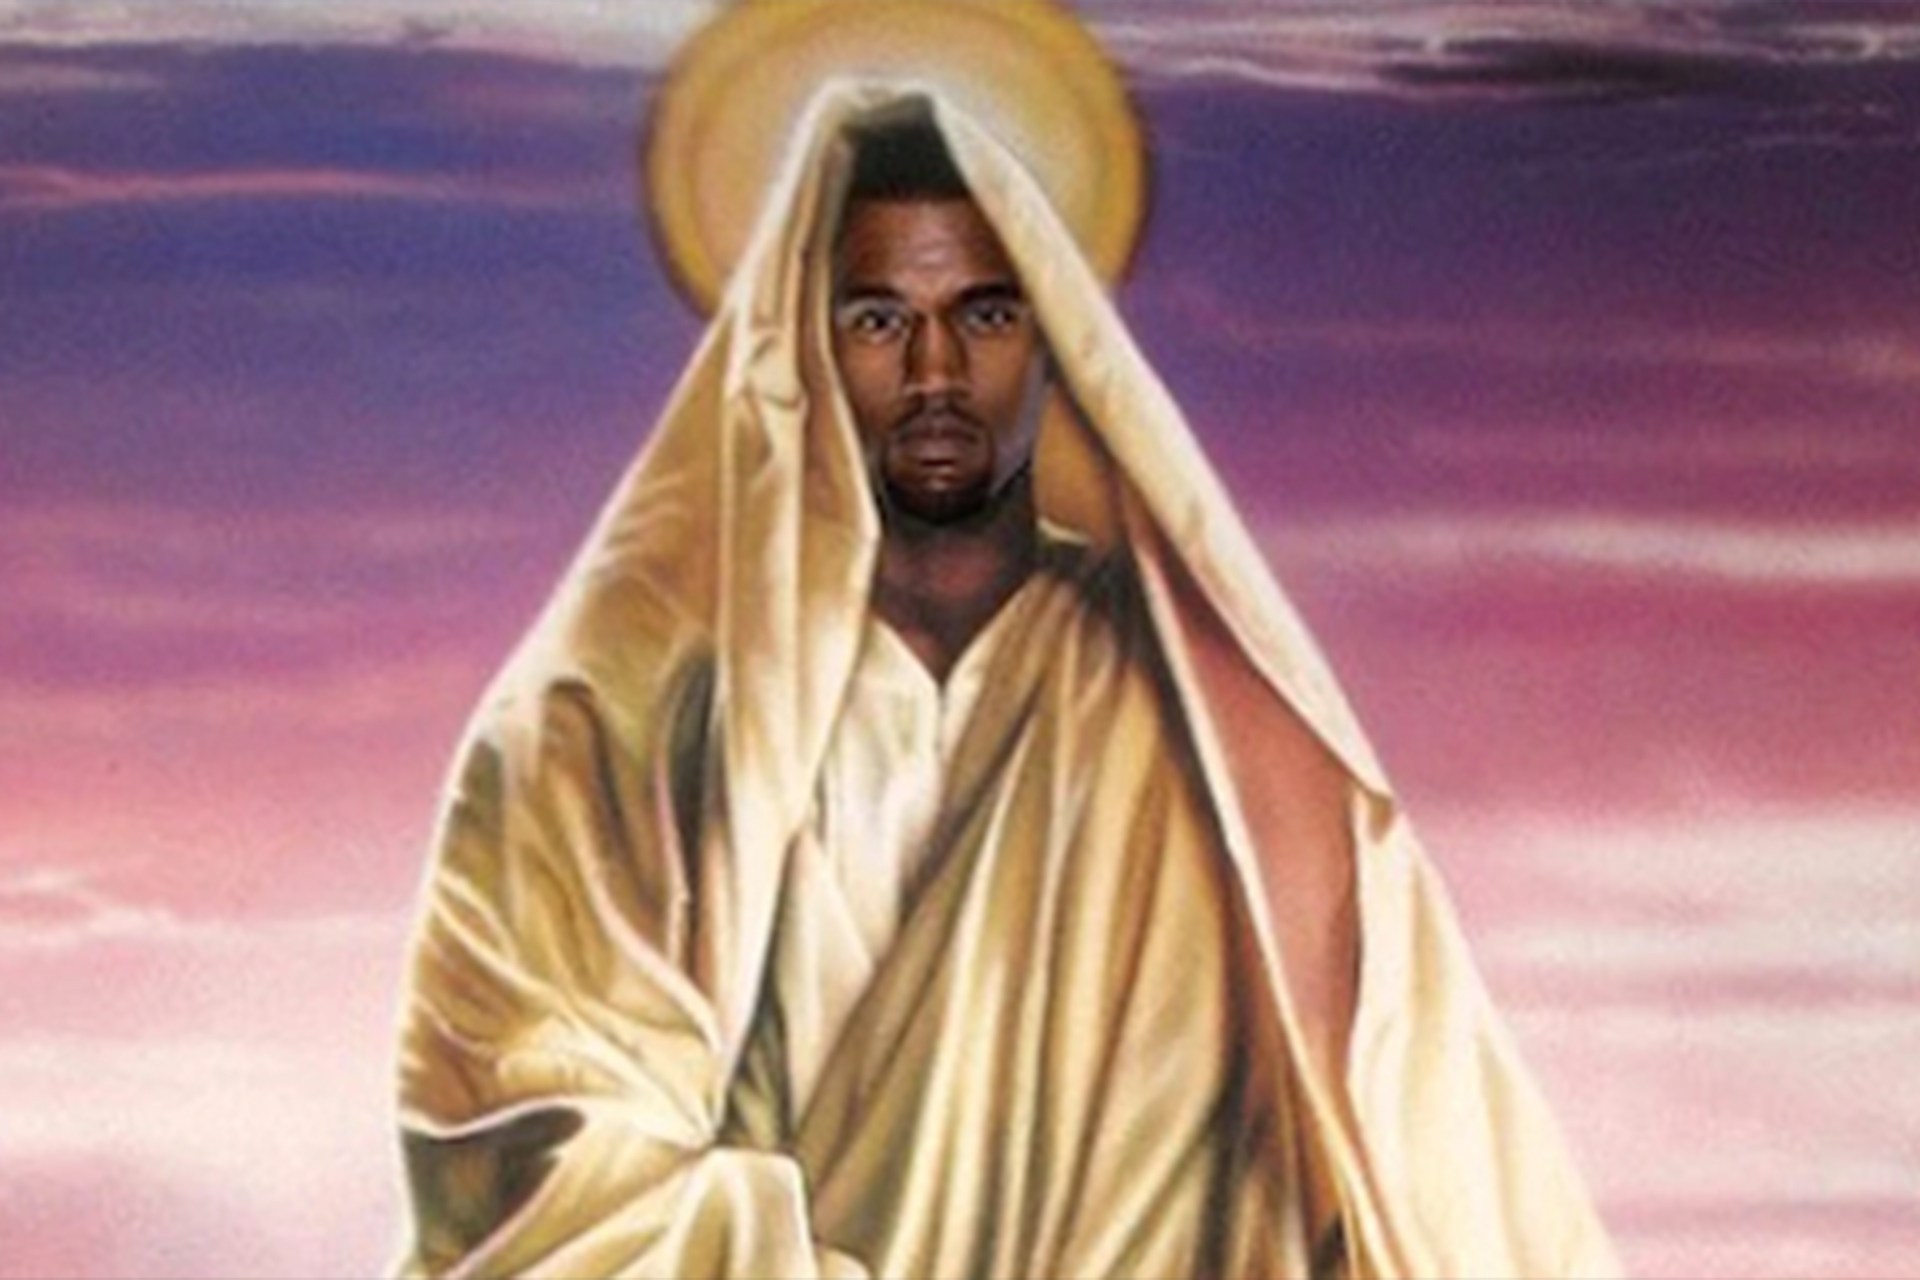 Entrepreneurship Part II | A picture of Jesus with Kanye West's face